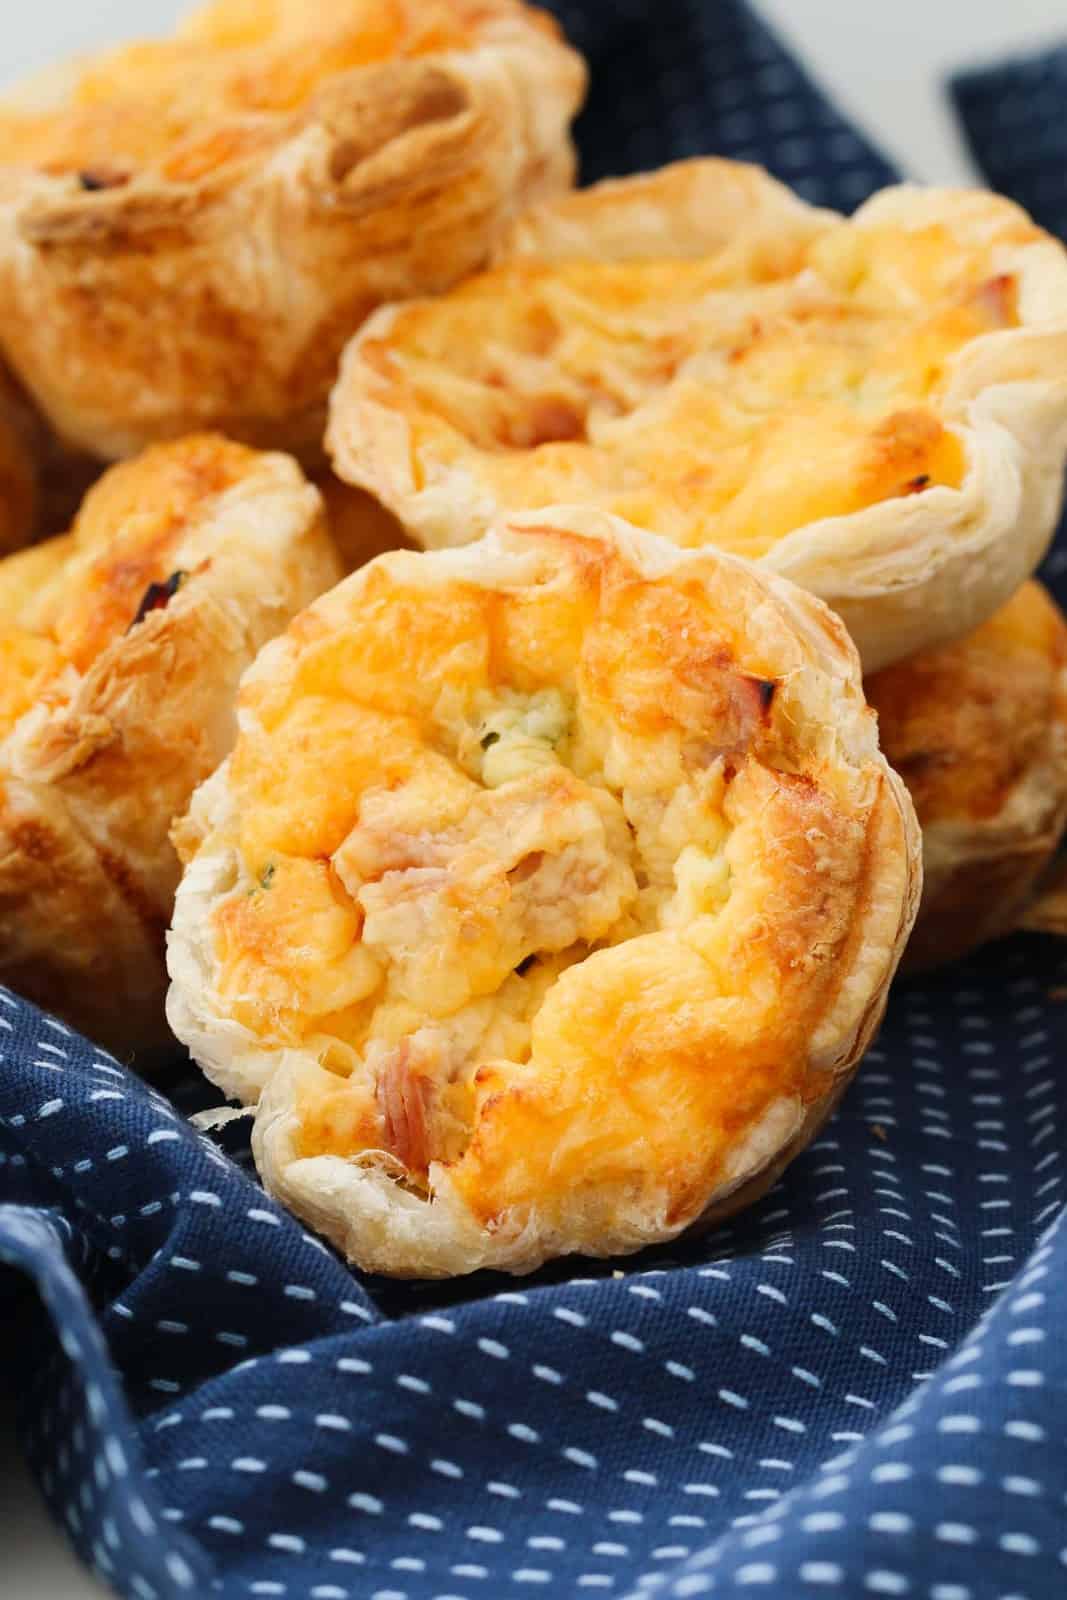 Individual serve golden mini corn, ham and cheese quiches with a puff pastry crust arranged on a blue patterned tea towel.